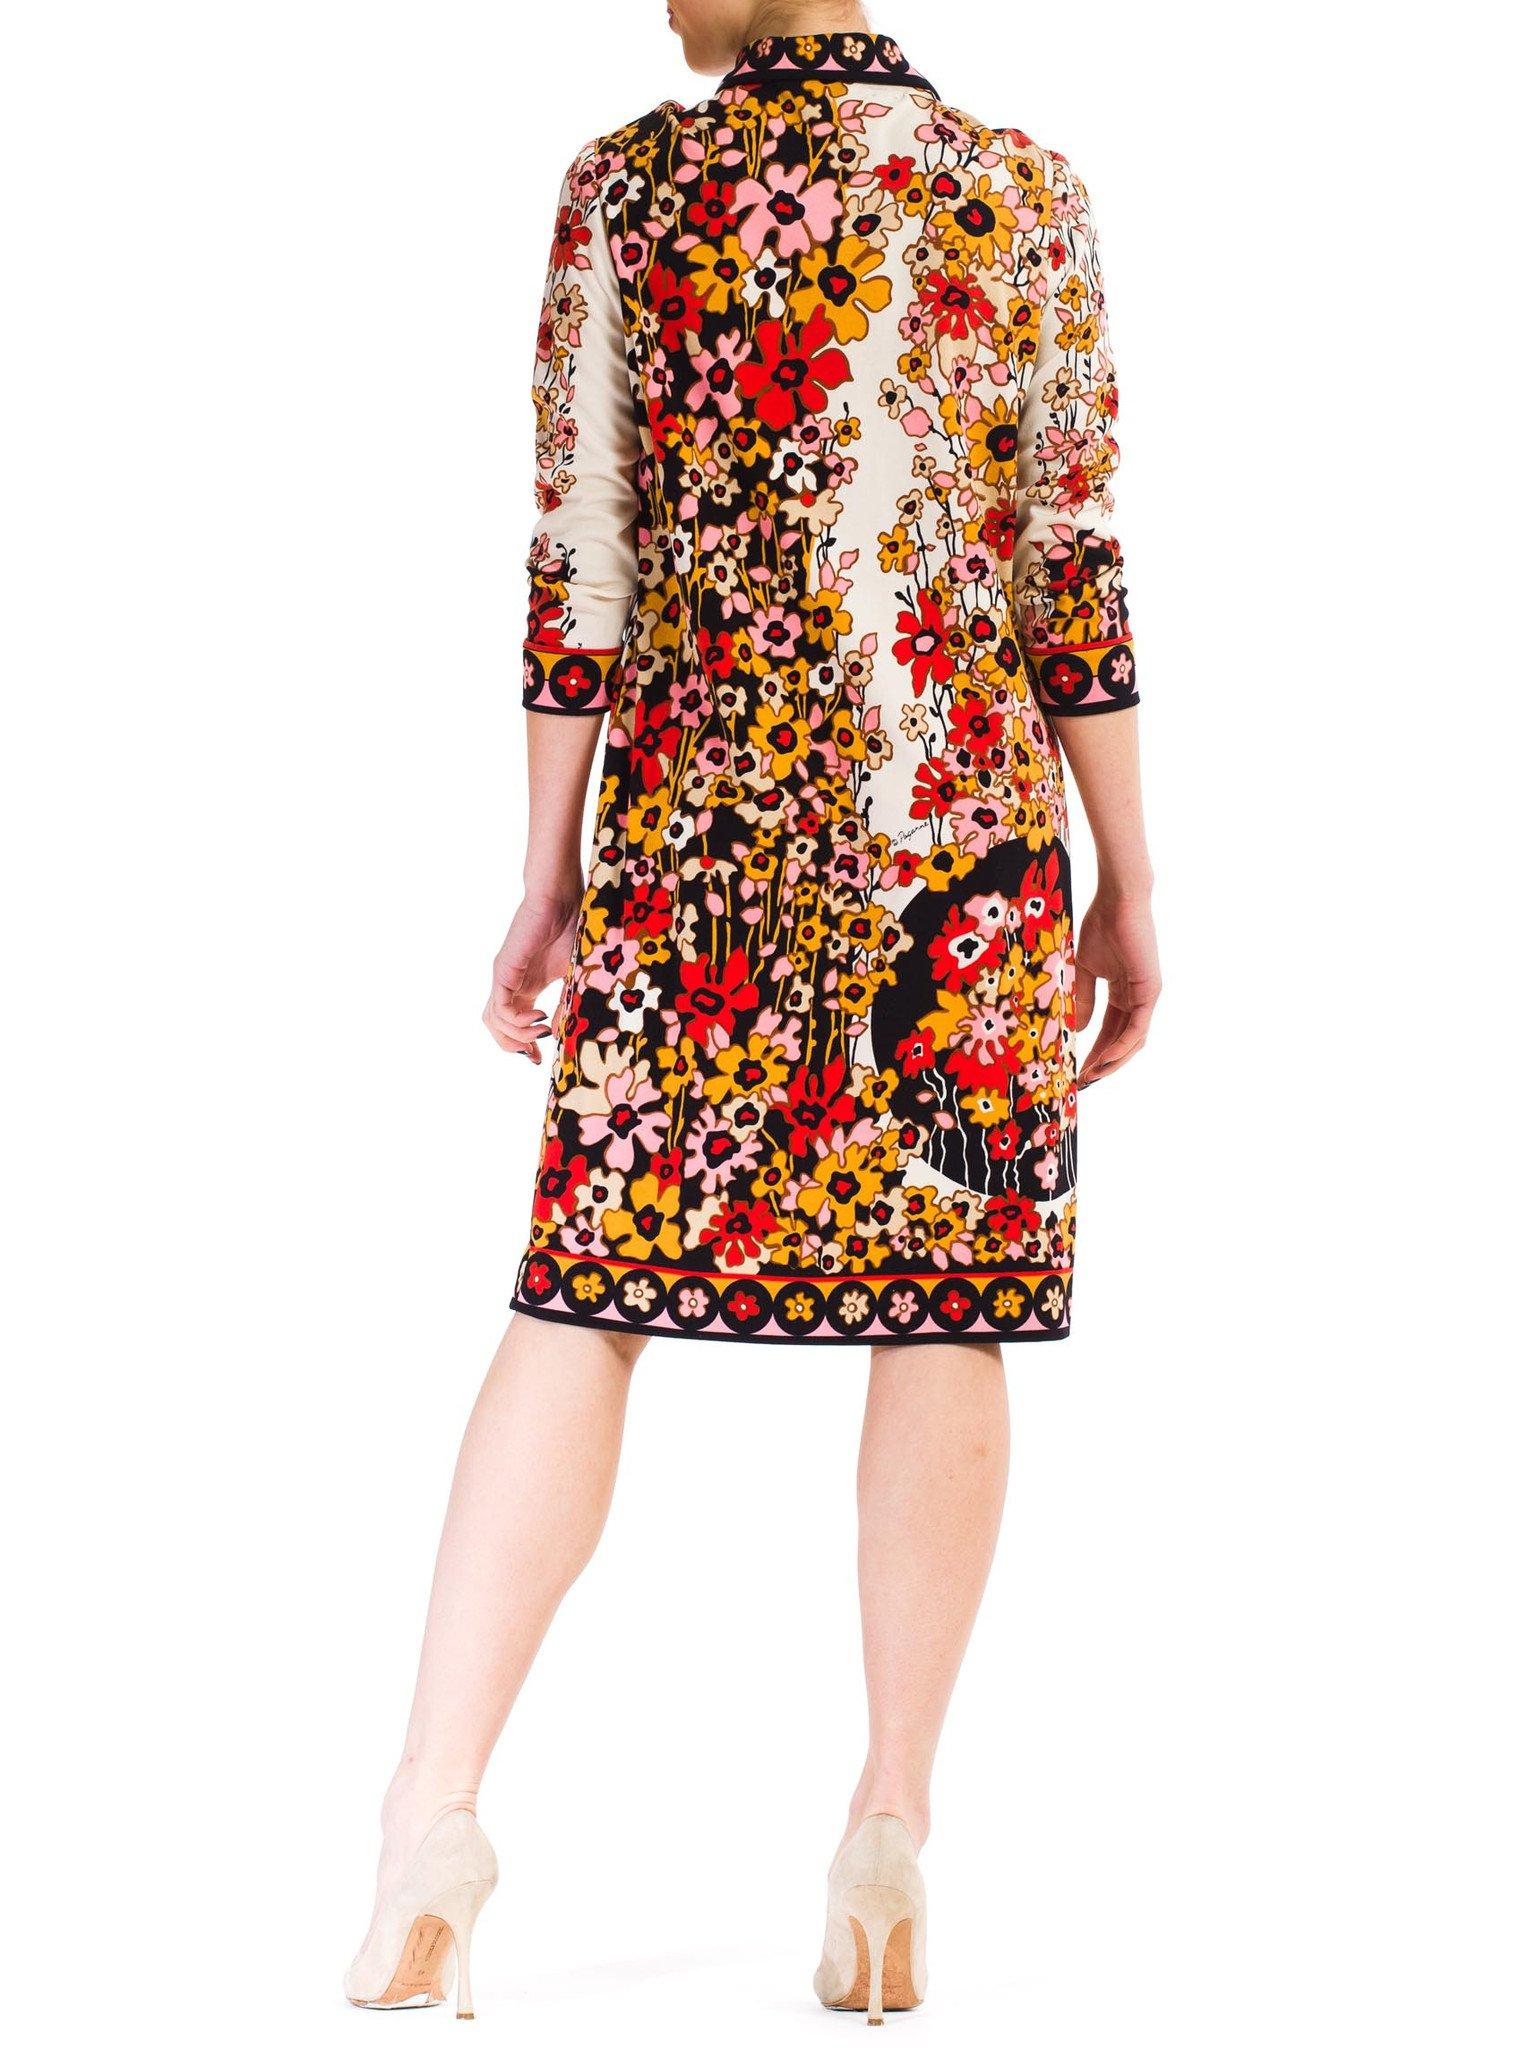 1960S PAGANNE Floral Printed Polyester Jersey Mod Shift Dress 3